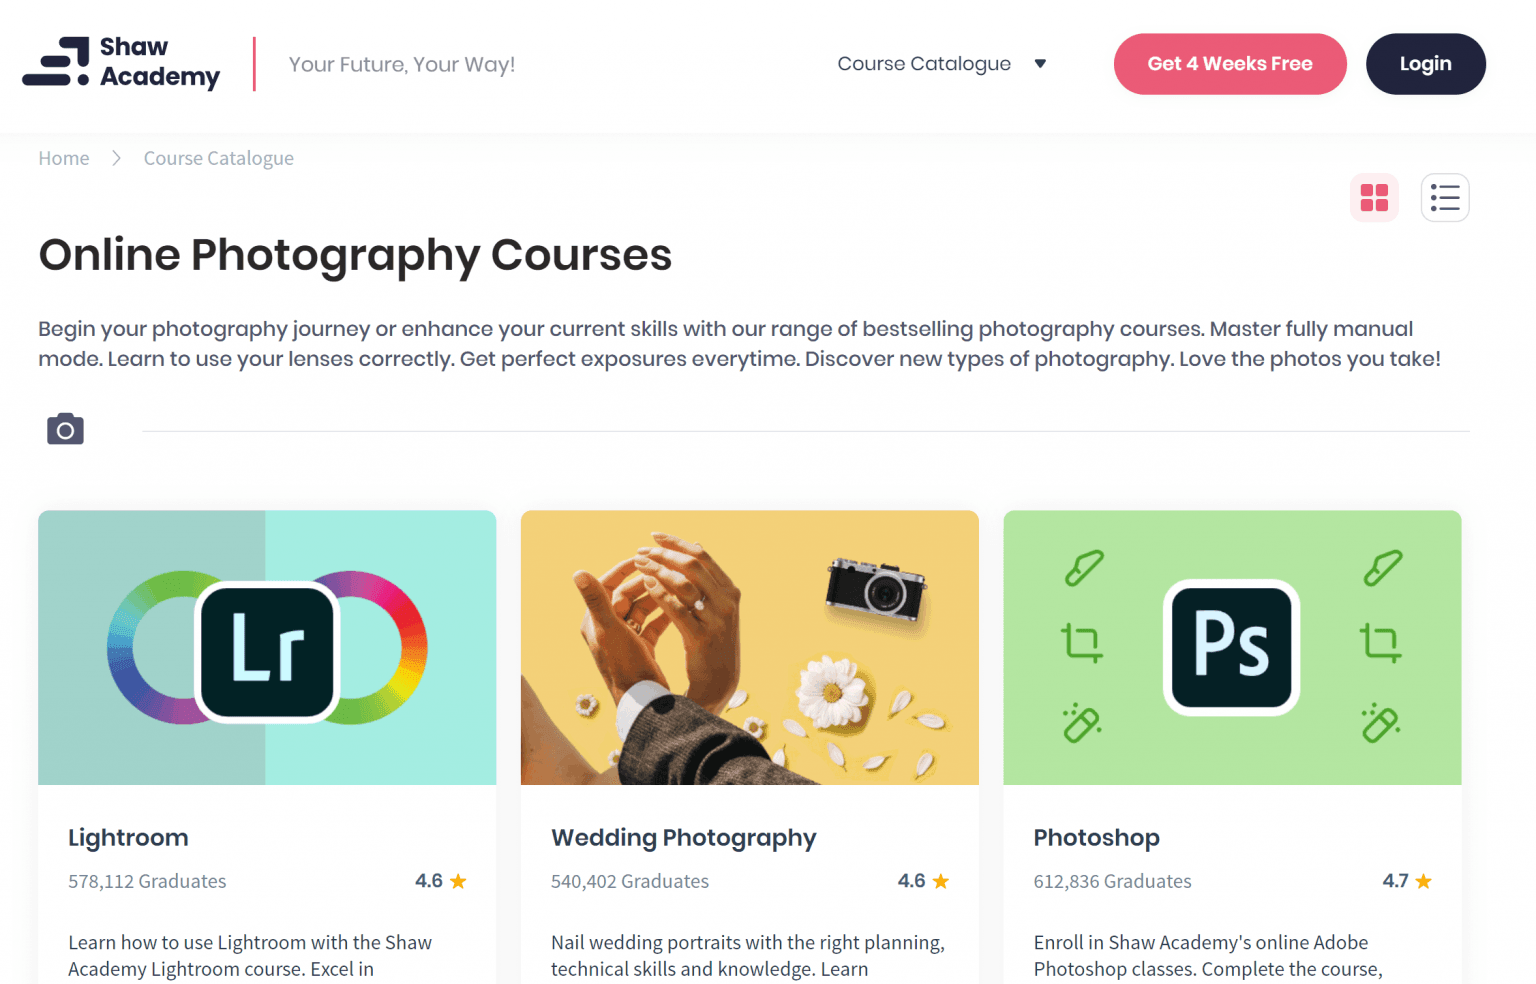 Shaw Academy: Online Photography Courses